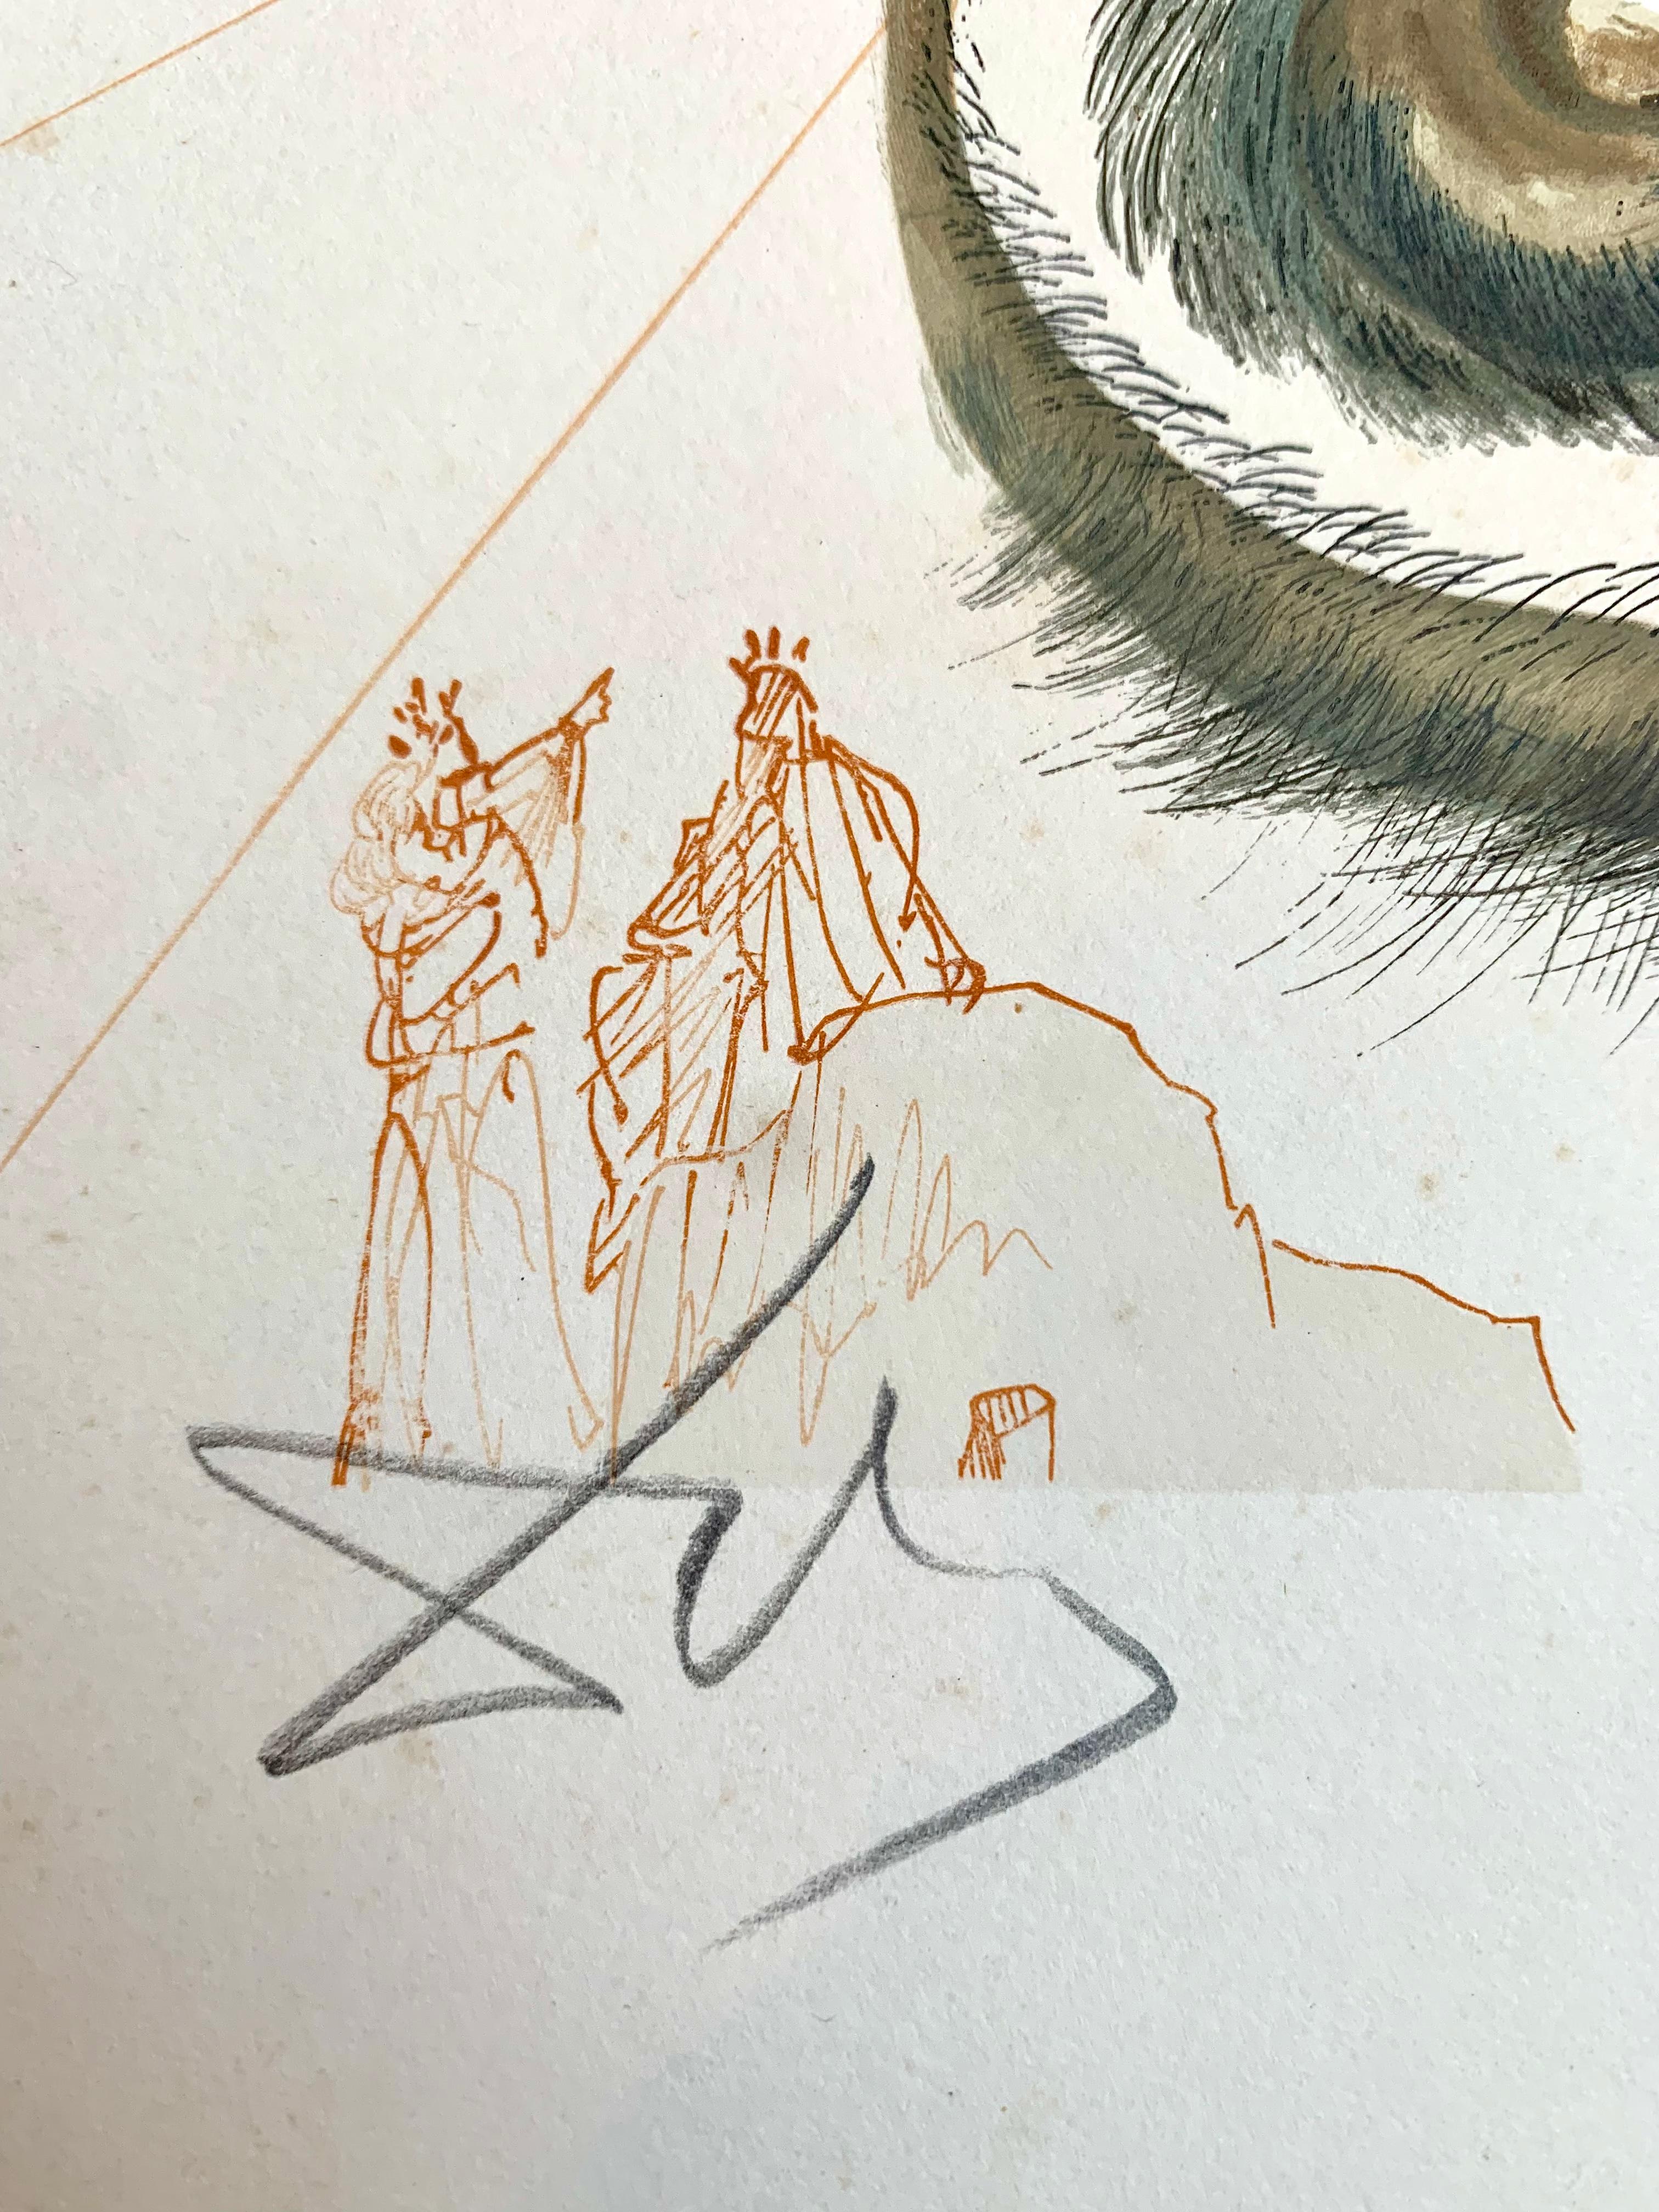 Inferno canto 20 : Diviners and Sorceres engraving by Salvador Dali. It describe a scene of the Divine comédie de Dante : And striking his head, he said: 